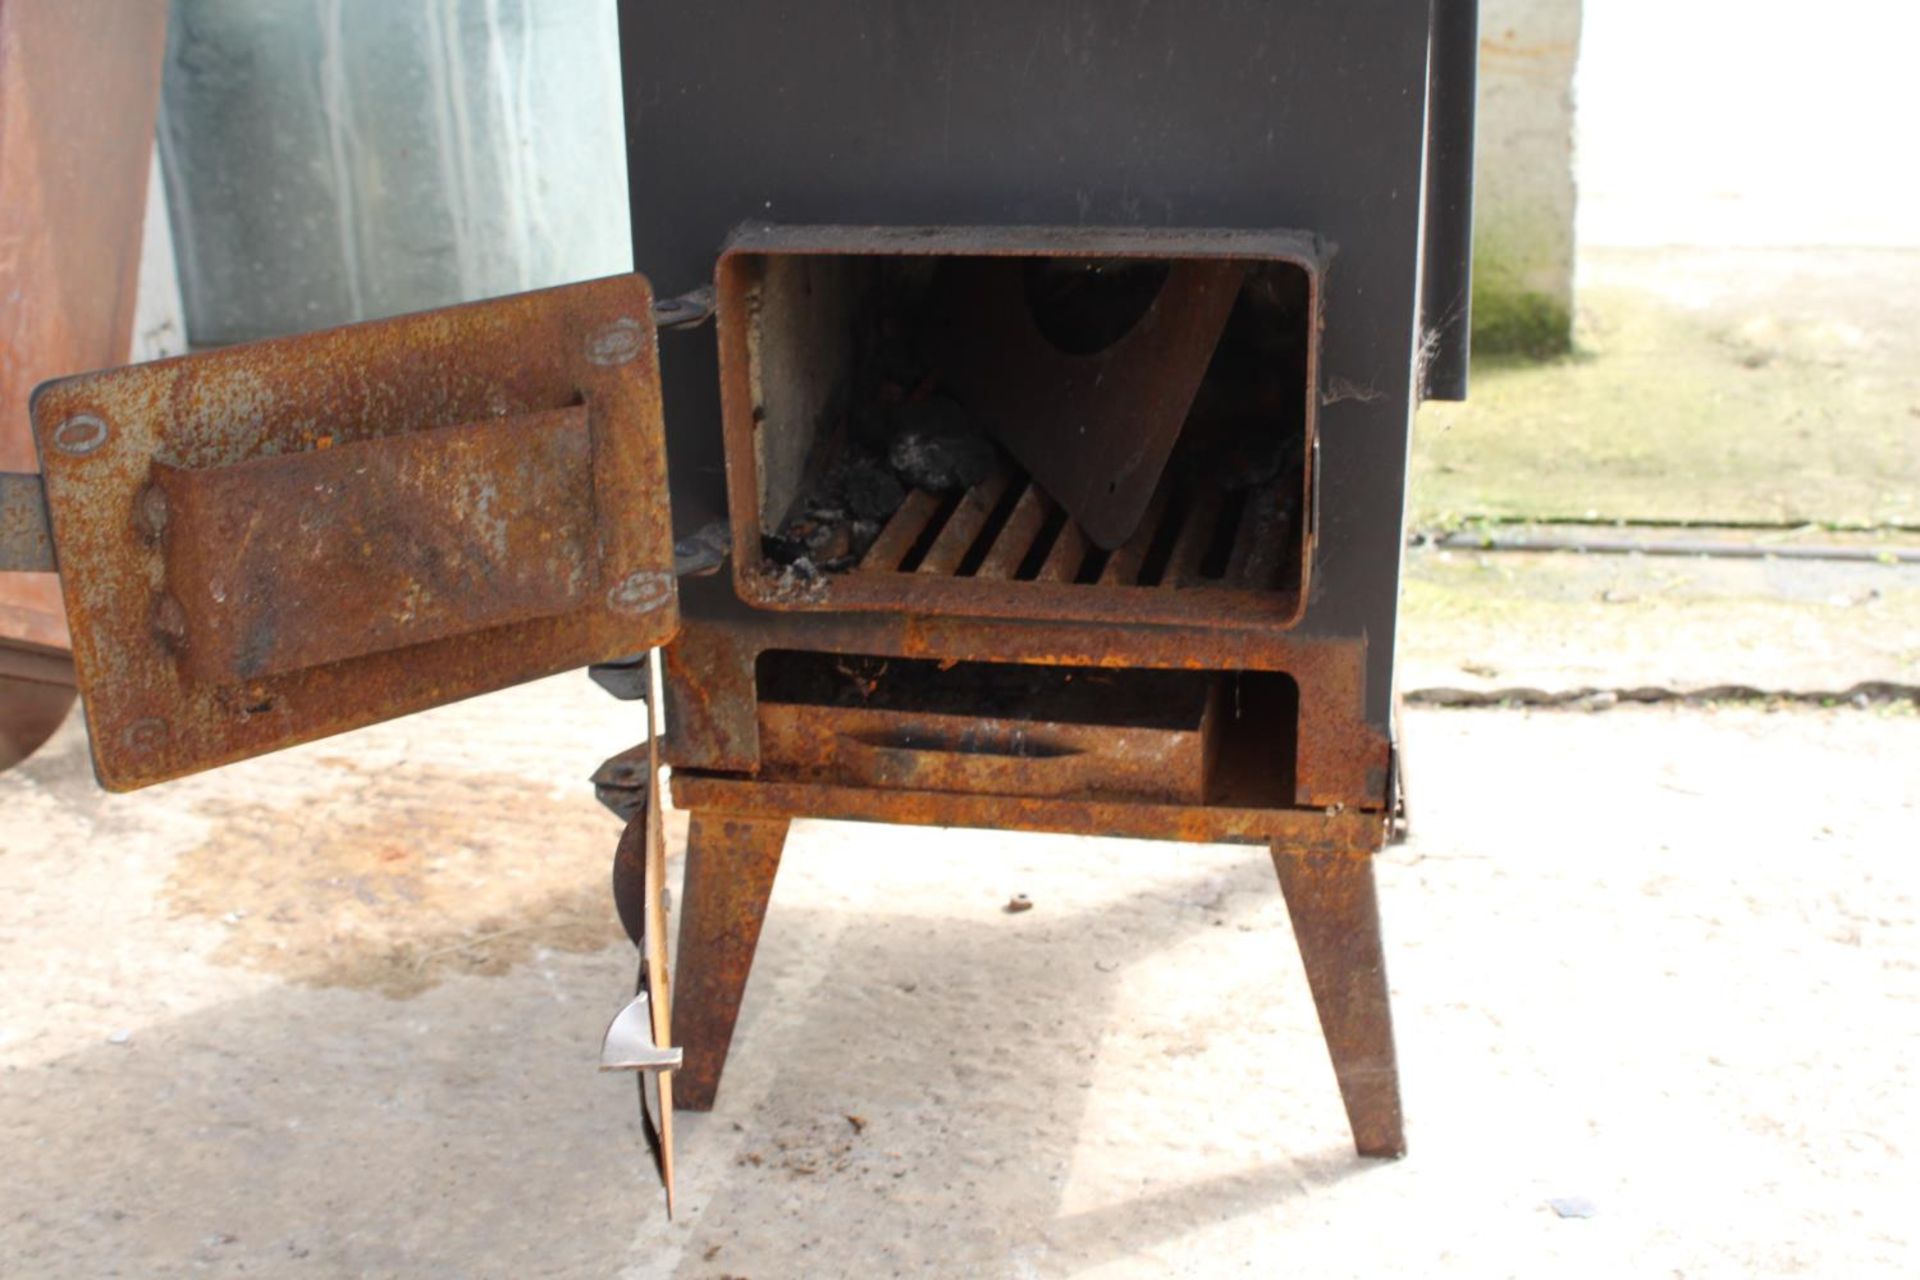 A VINTAGE CAST IRON STOVE - Image 4 of 5